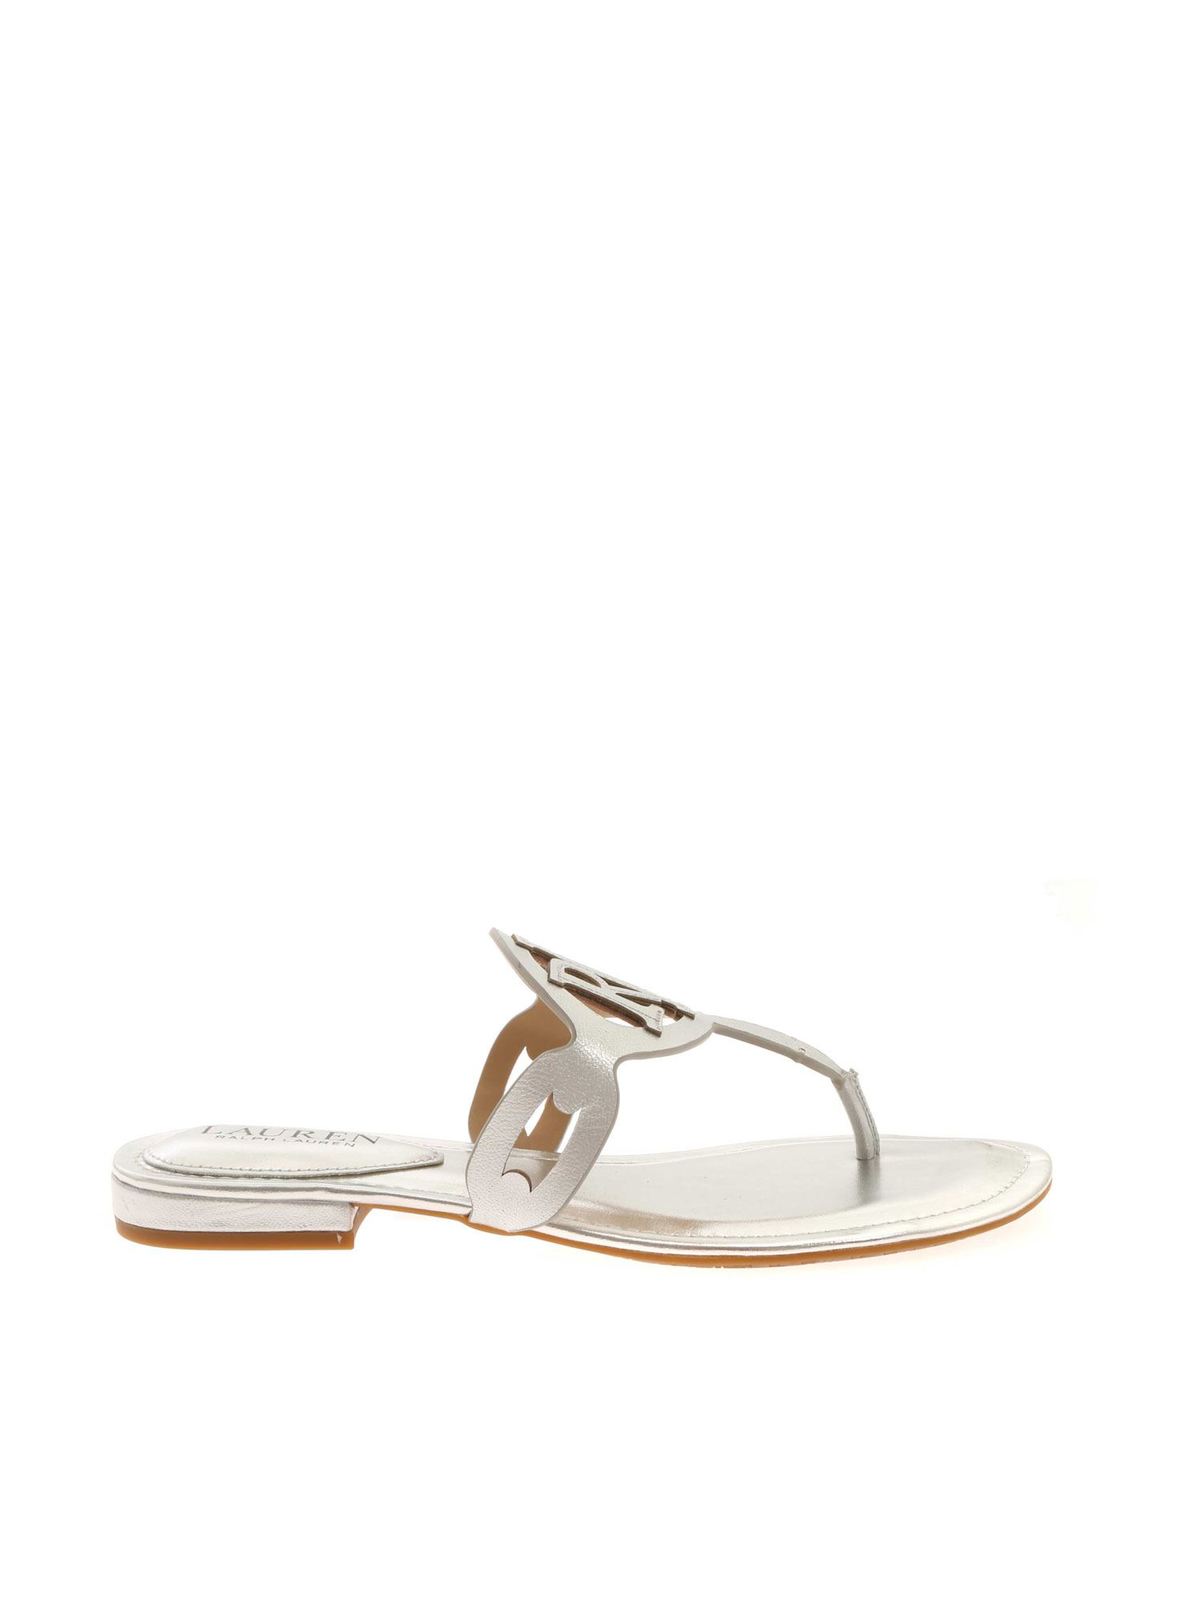 Laurence Ralph Lauren - Audrie thong sandals in silver - sandals ...